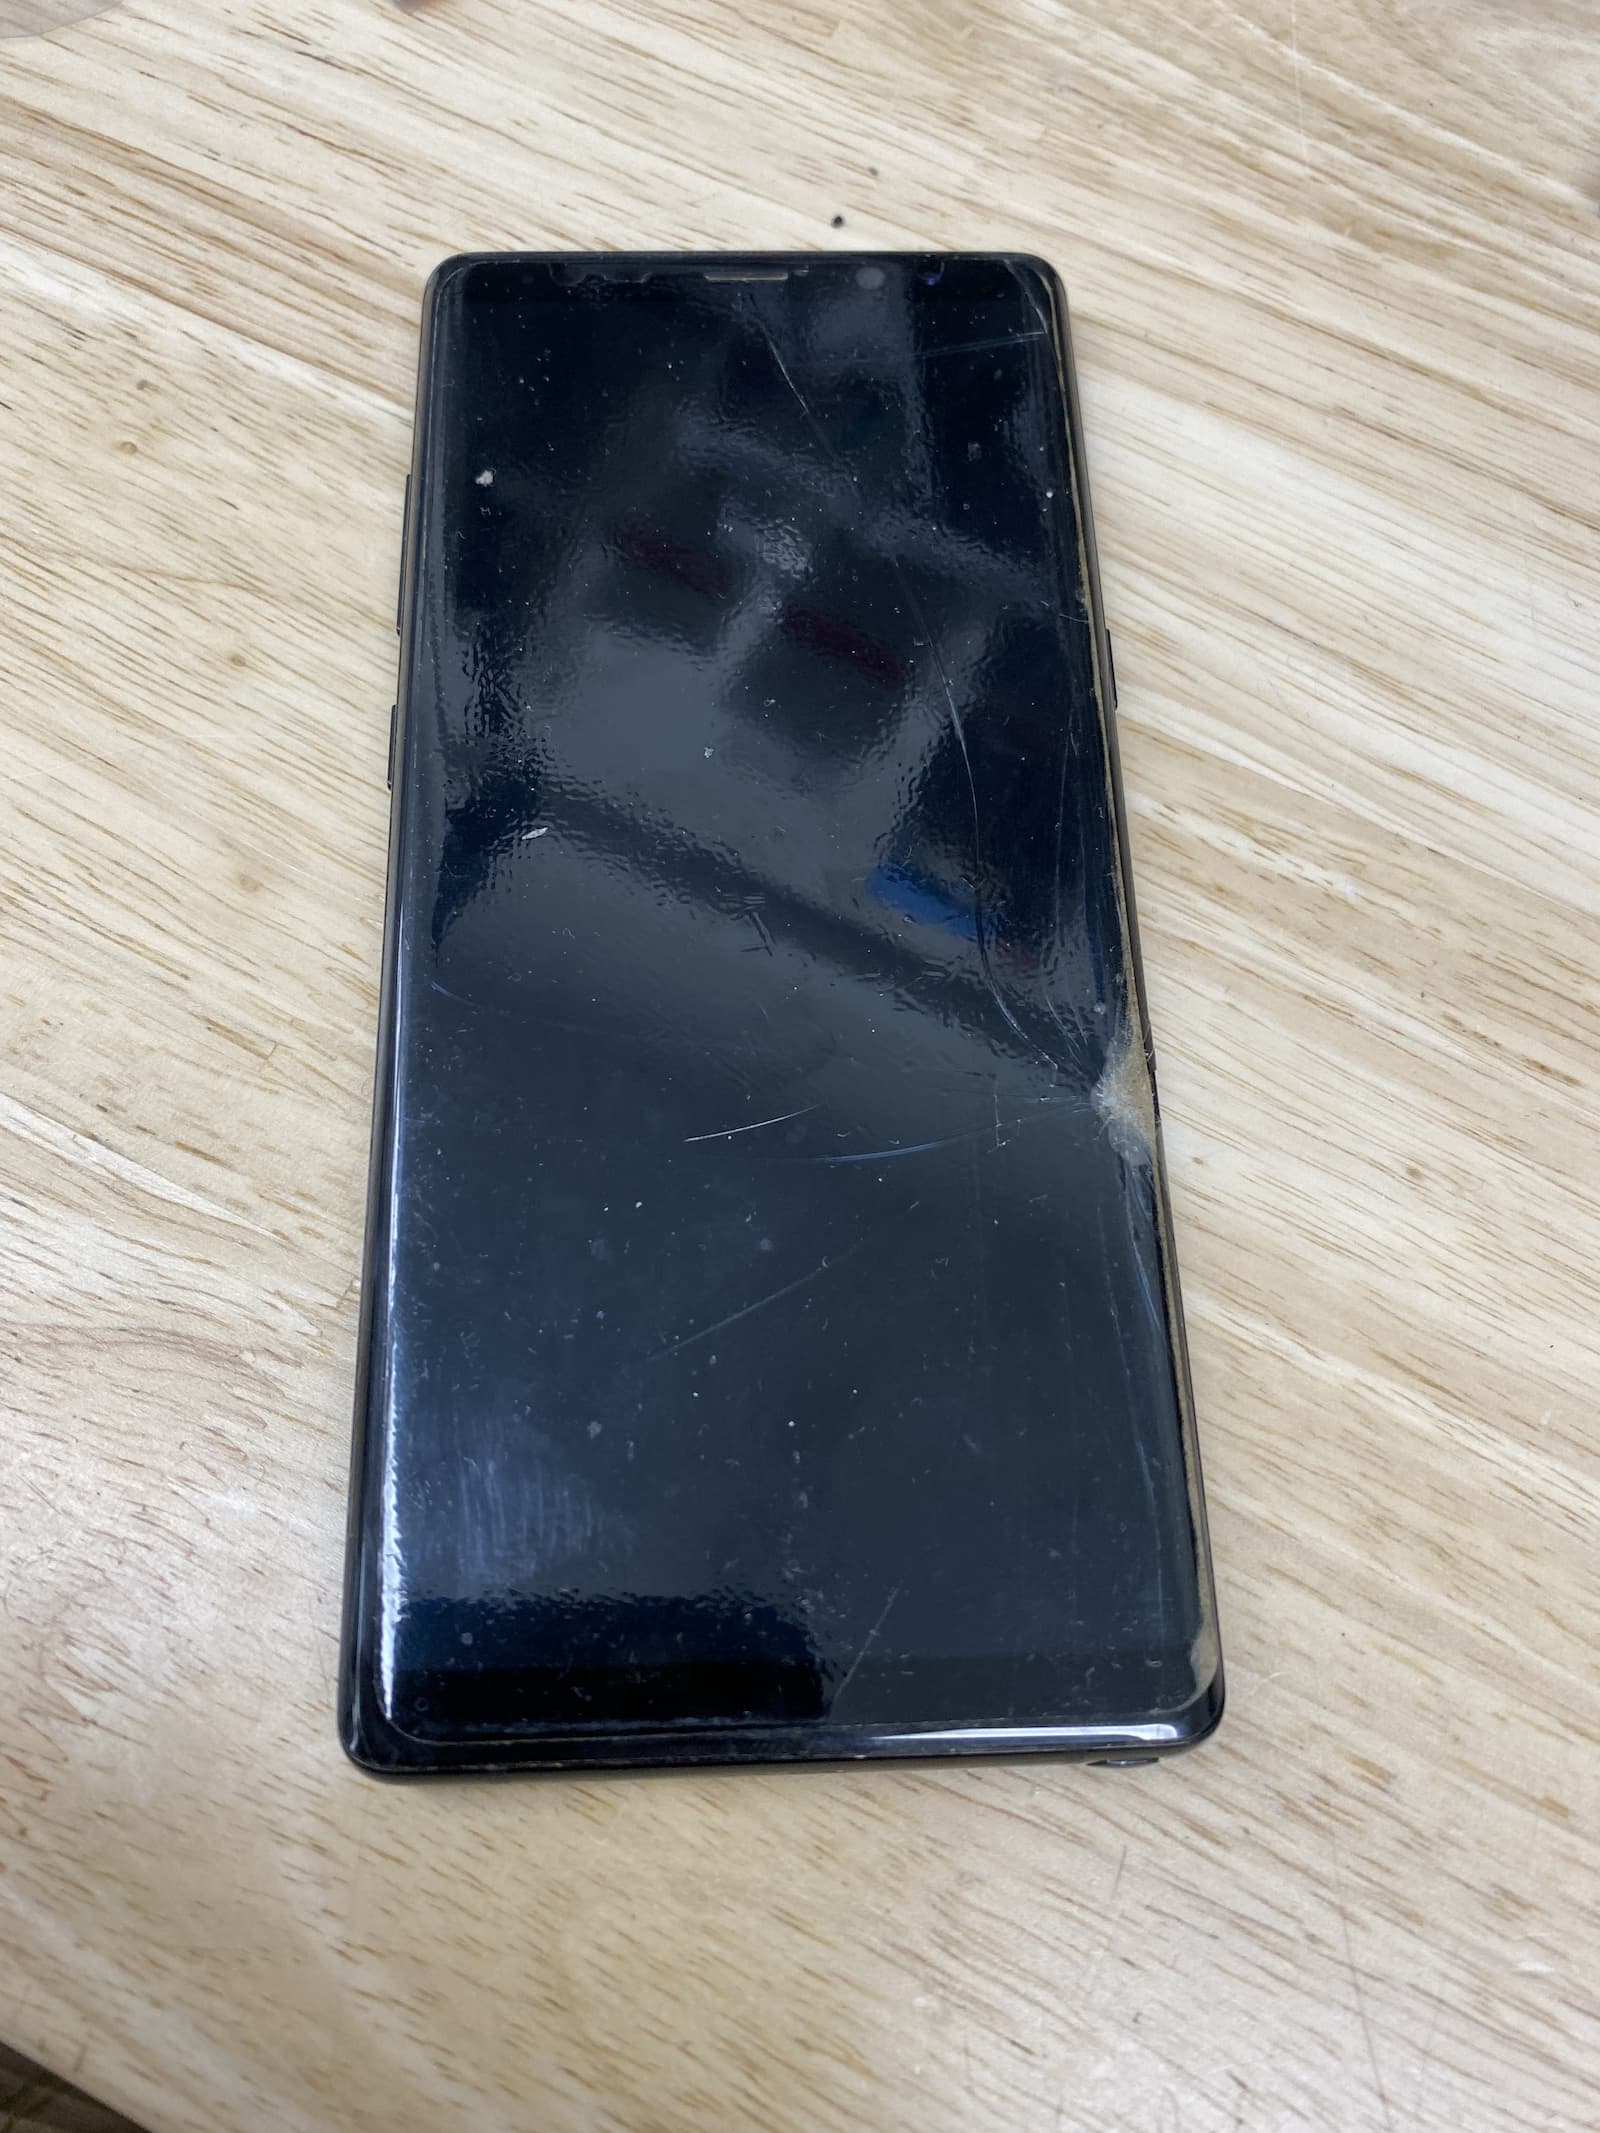 Cracked screen on Samsung Galaxy Note 8 with phone off.